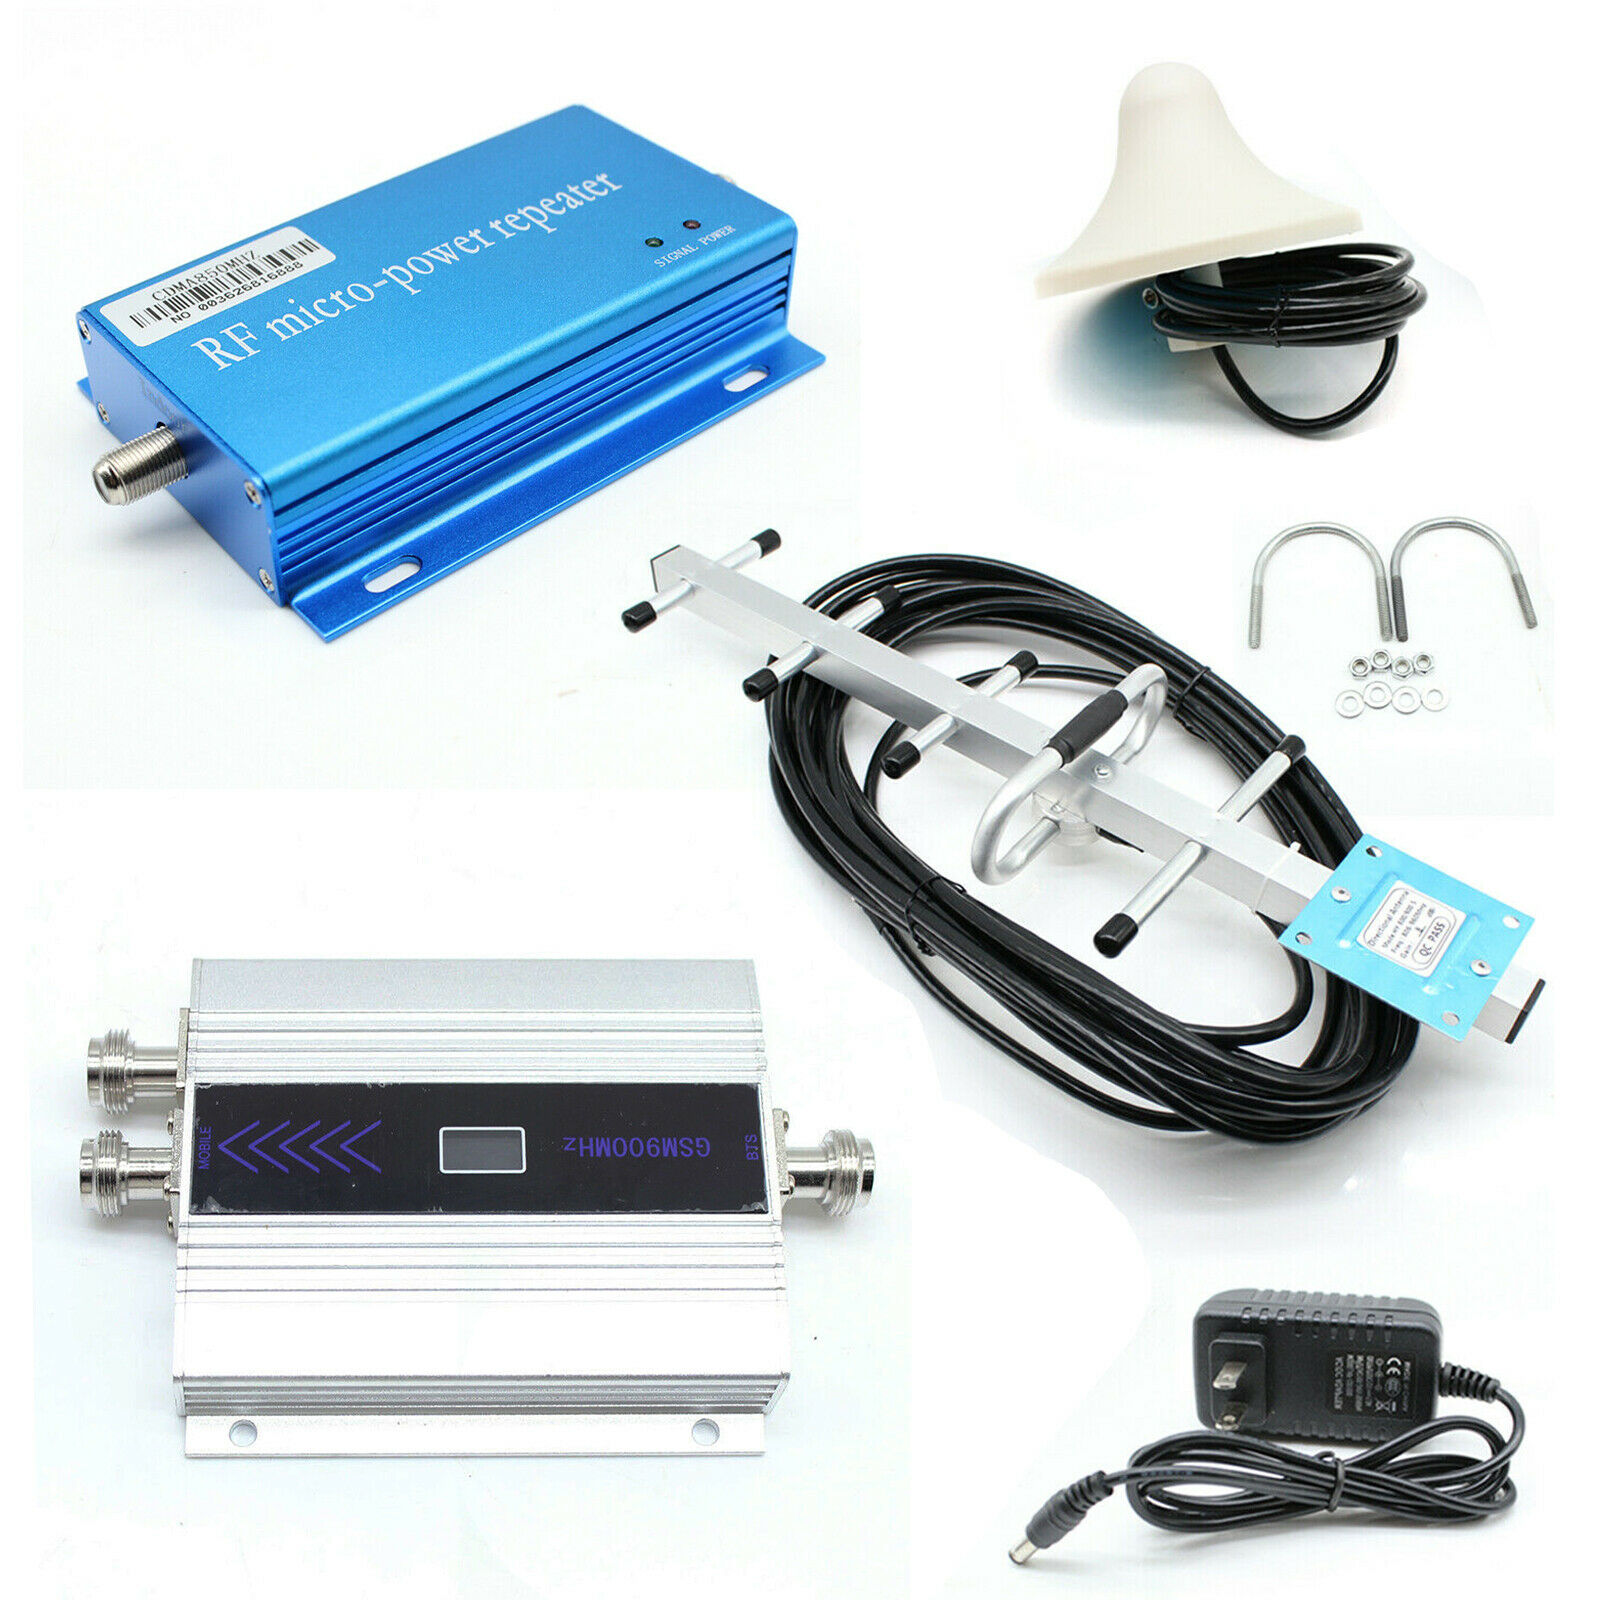 Mobile Cell Phone Signal Booster 3G 4G CDMA 850MHz GSM 900MHz Amplifier Repeater